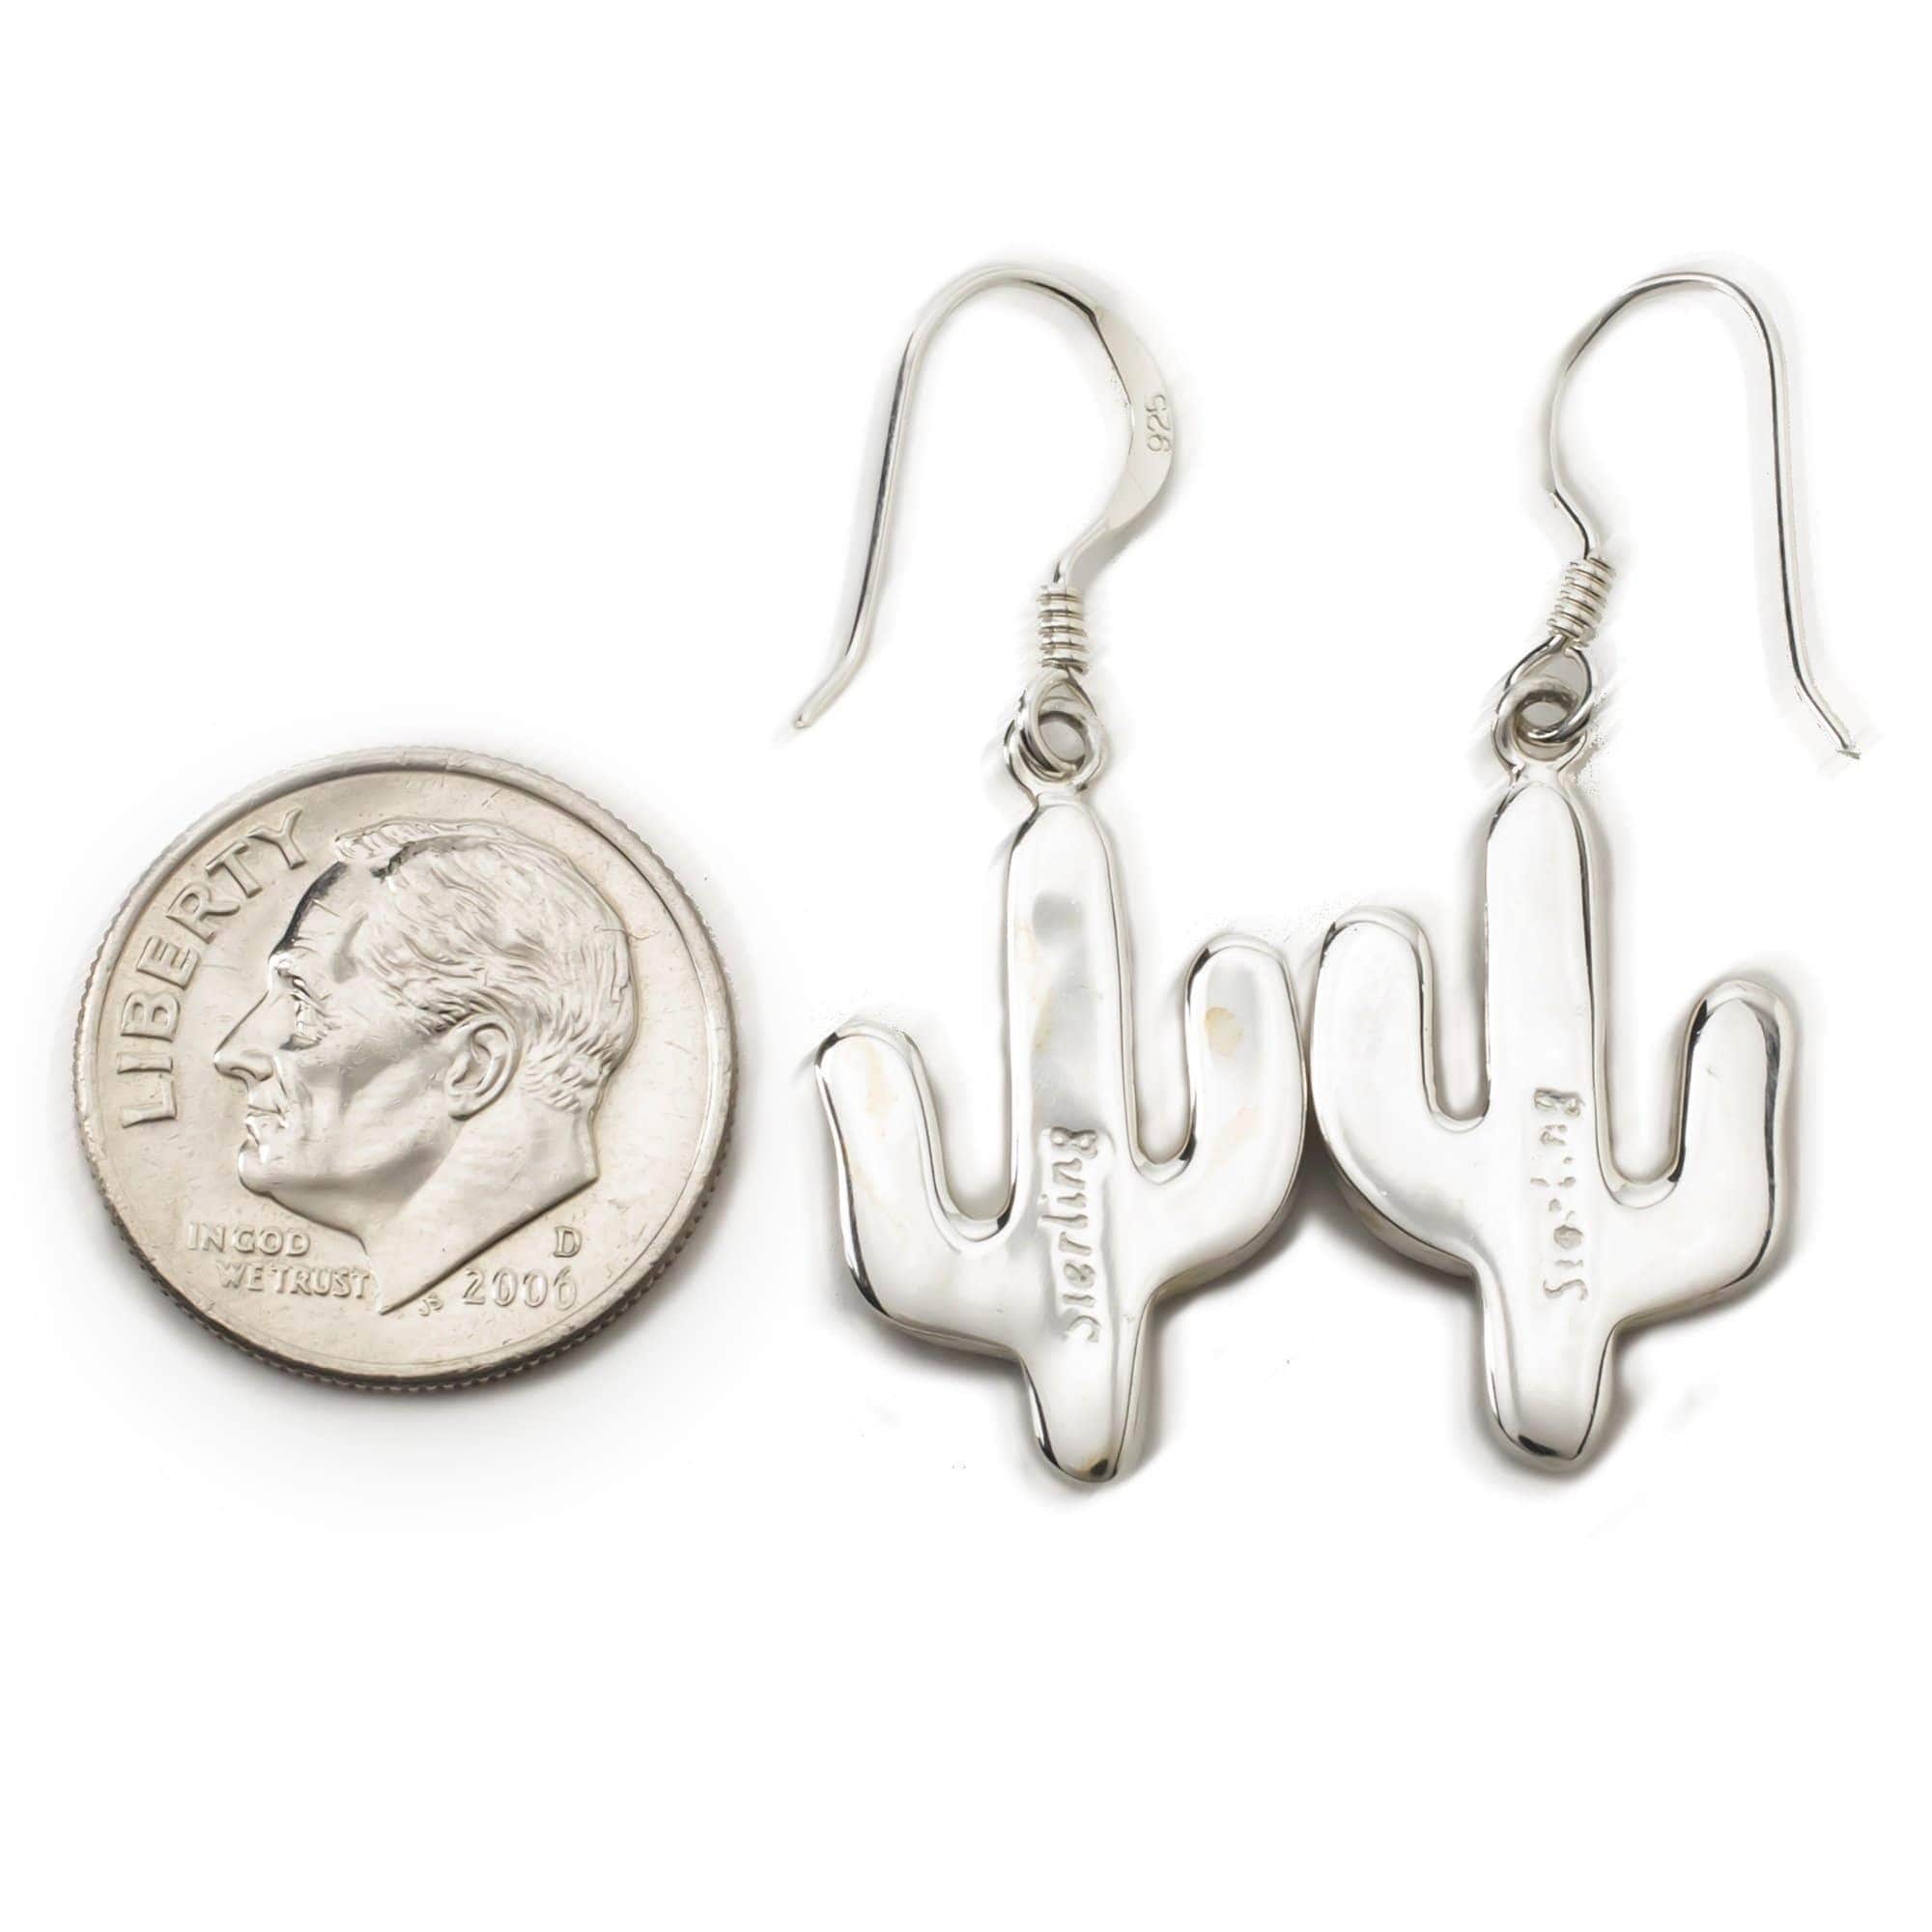 Kalifano Southwest Silver Jewelry Spiny Oyster Shell Cactus 925 Sterling Silver Earring with French Hook USA Handmade with Opal Accent NME.0602.SP